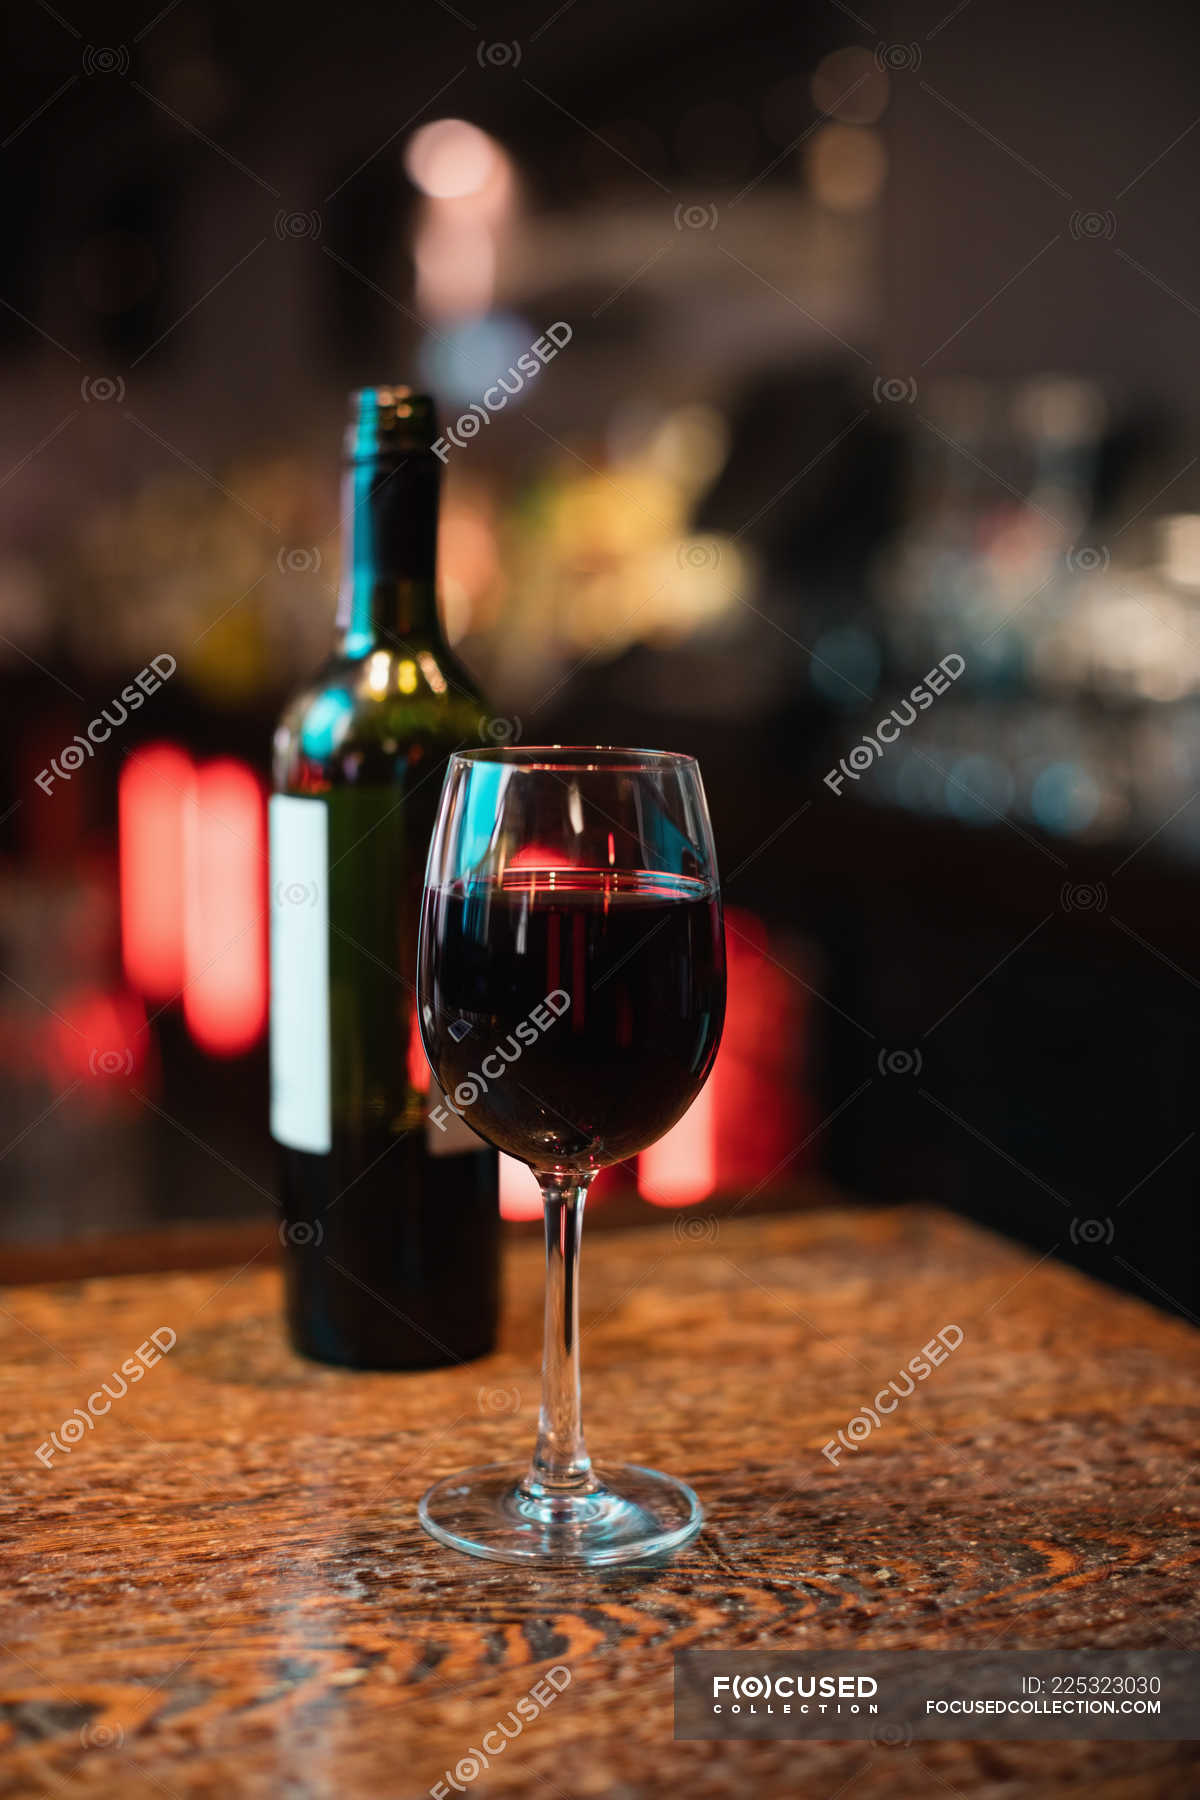 For tidlig dette Understrege Close-up of red wine glass on bar counter at bar — hotel, indoors - Stock  Photo | #225323030